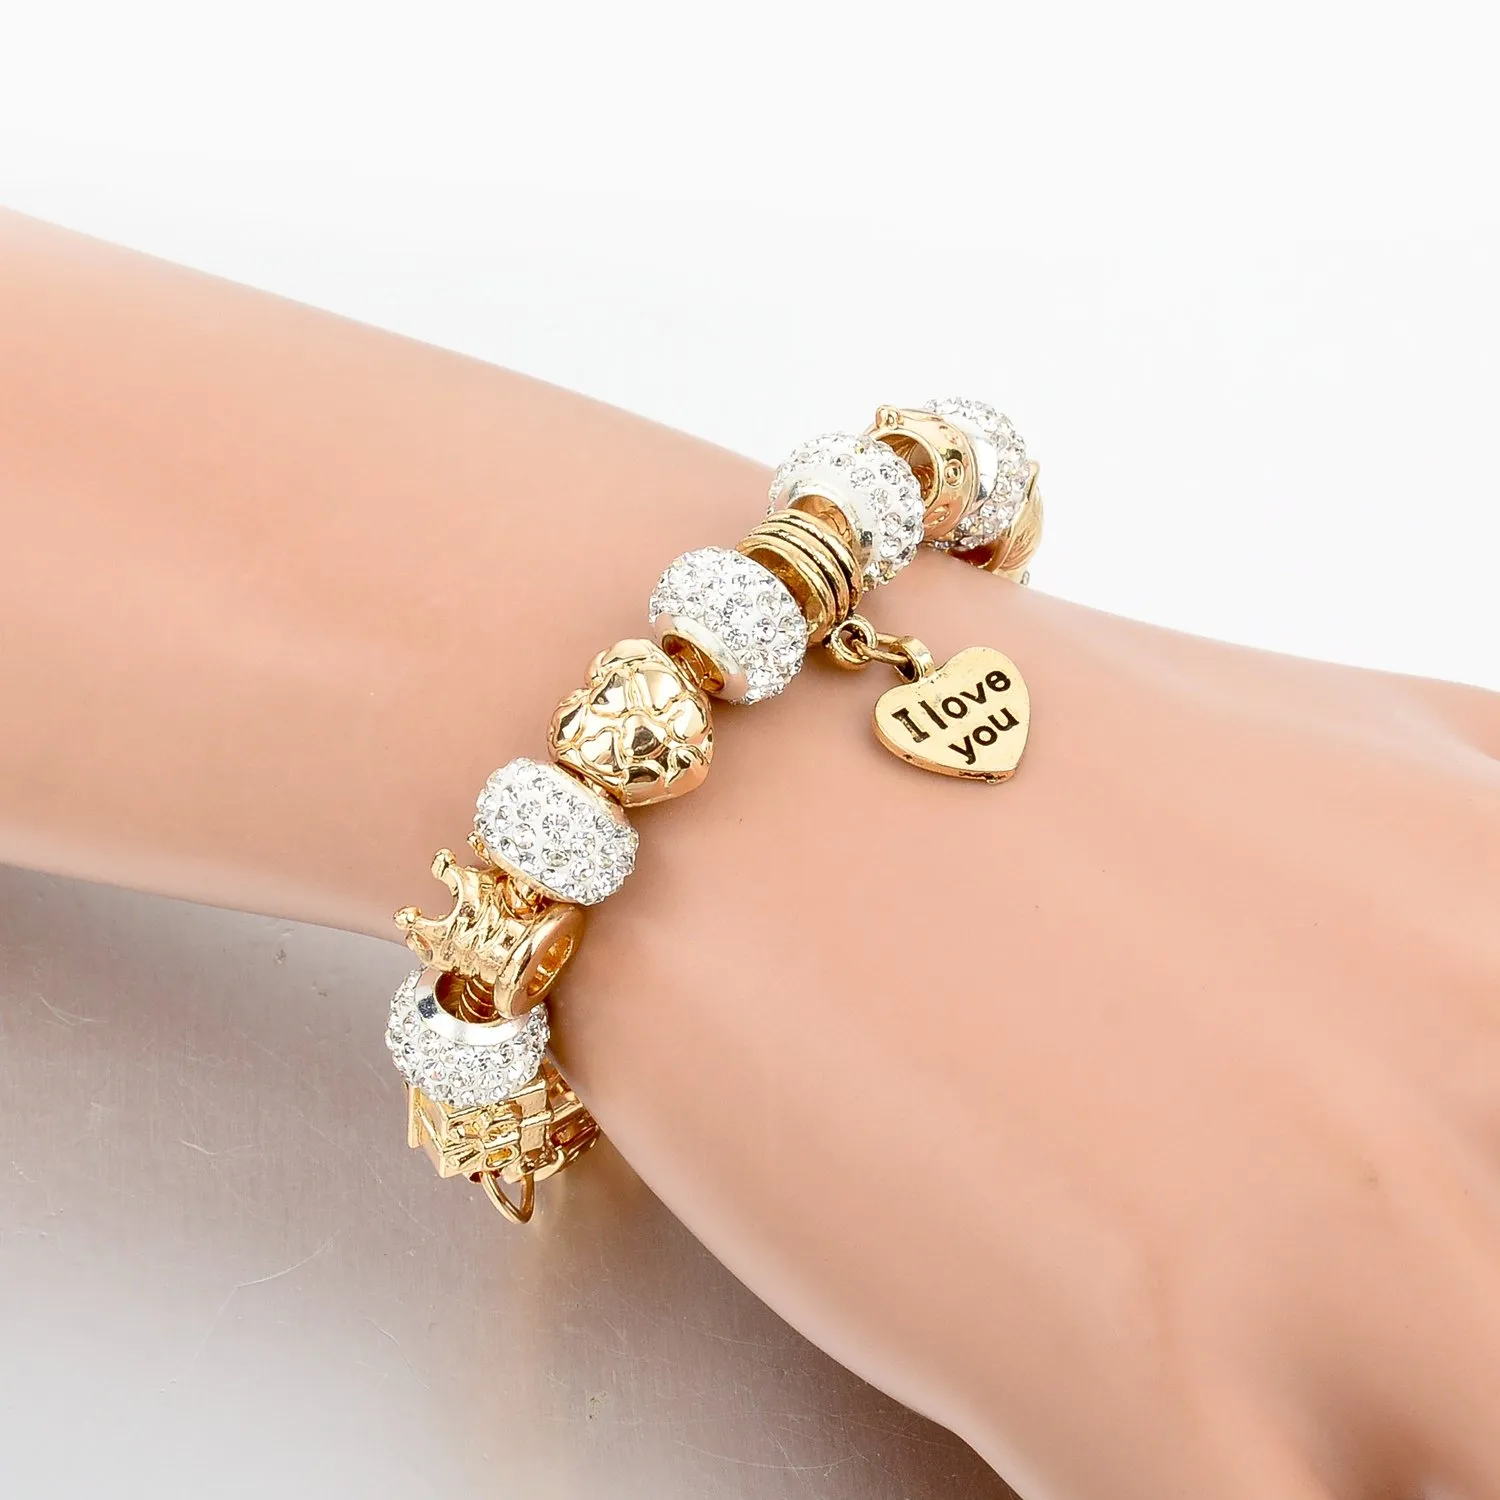  gold plated snake chain glass beads i love you charm beaded bracelets for women